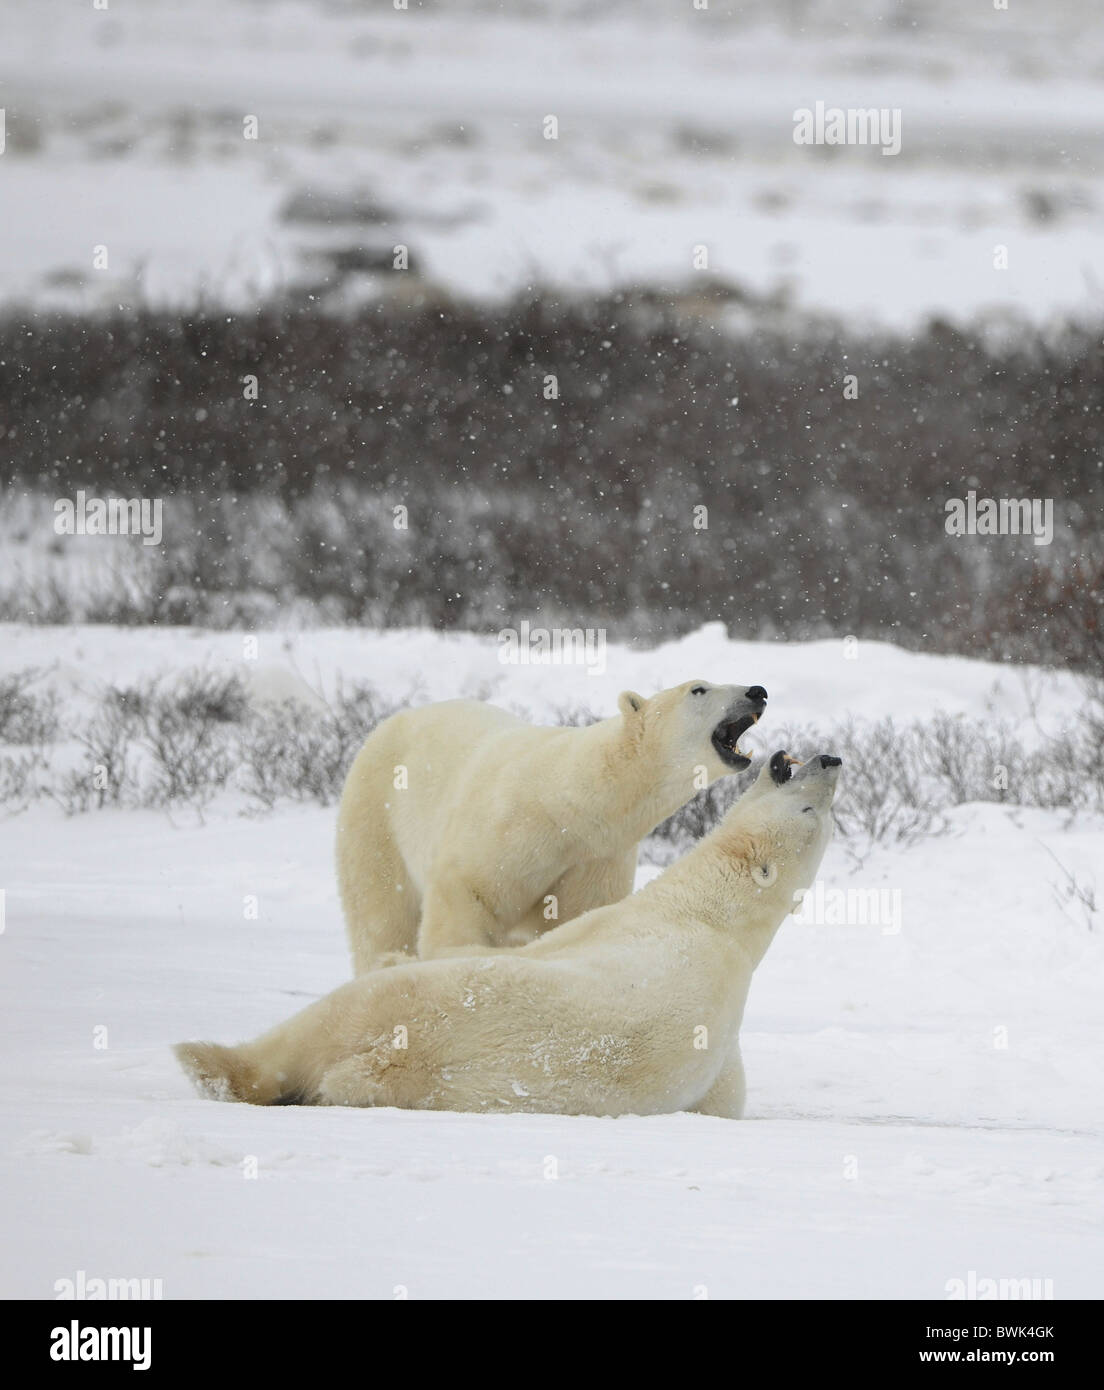 Couple. Polar bears play. Snow-covered tundra. It is snowing. Stock Photo